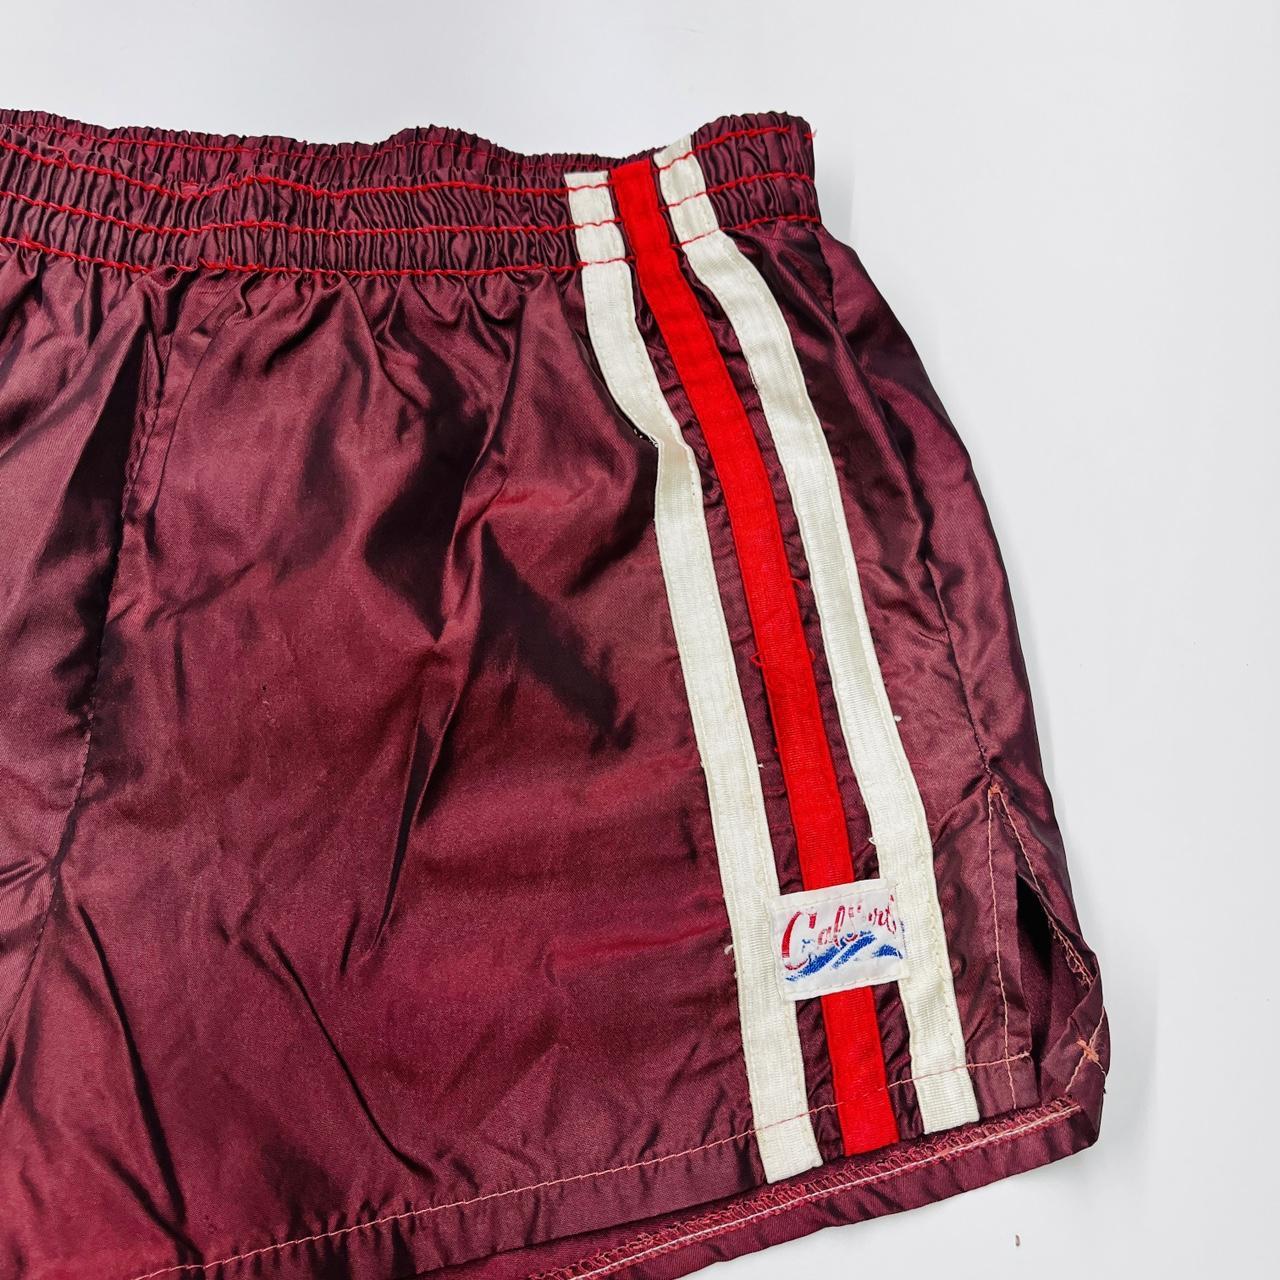 California Waves Women's Burgundy and Red Shorts (2)